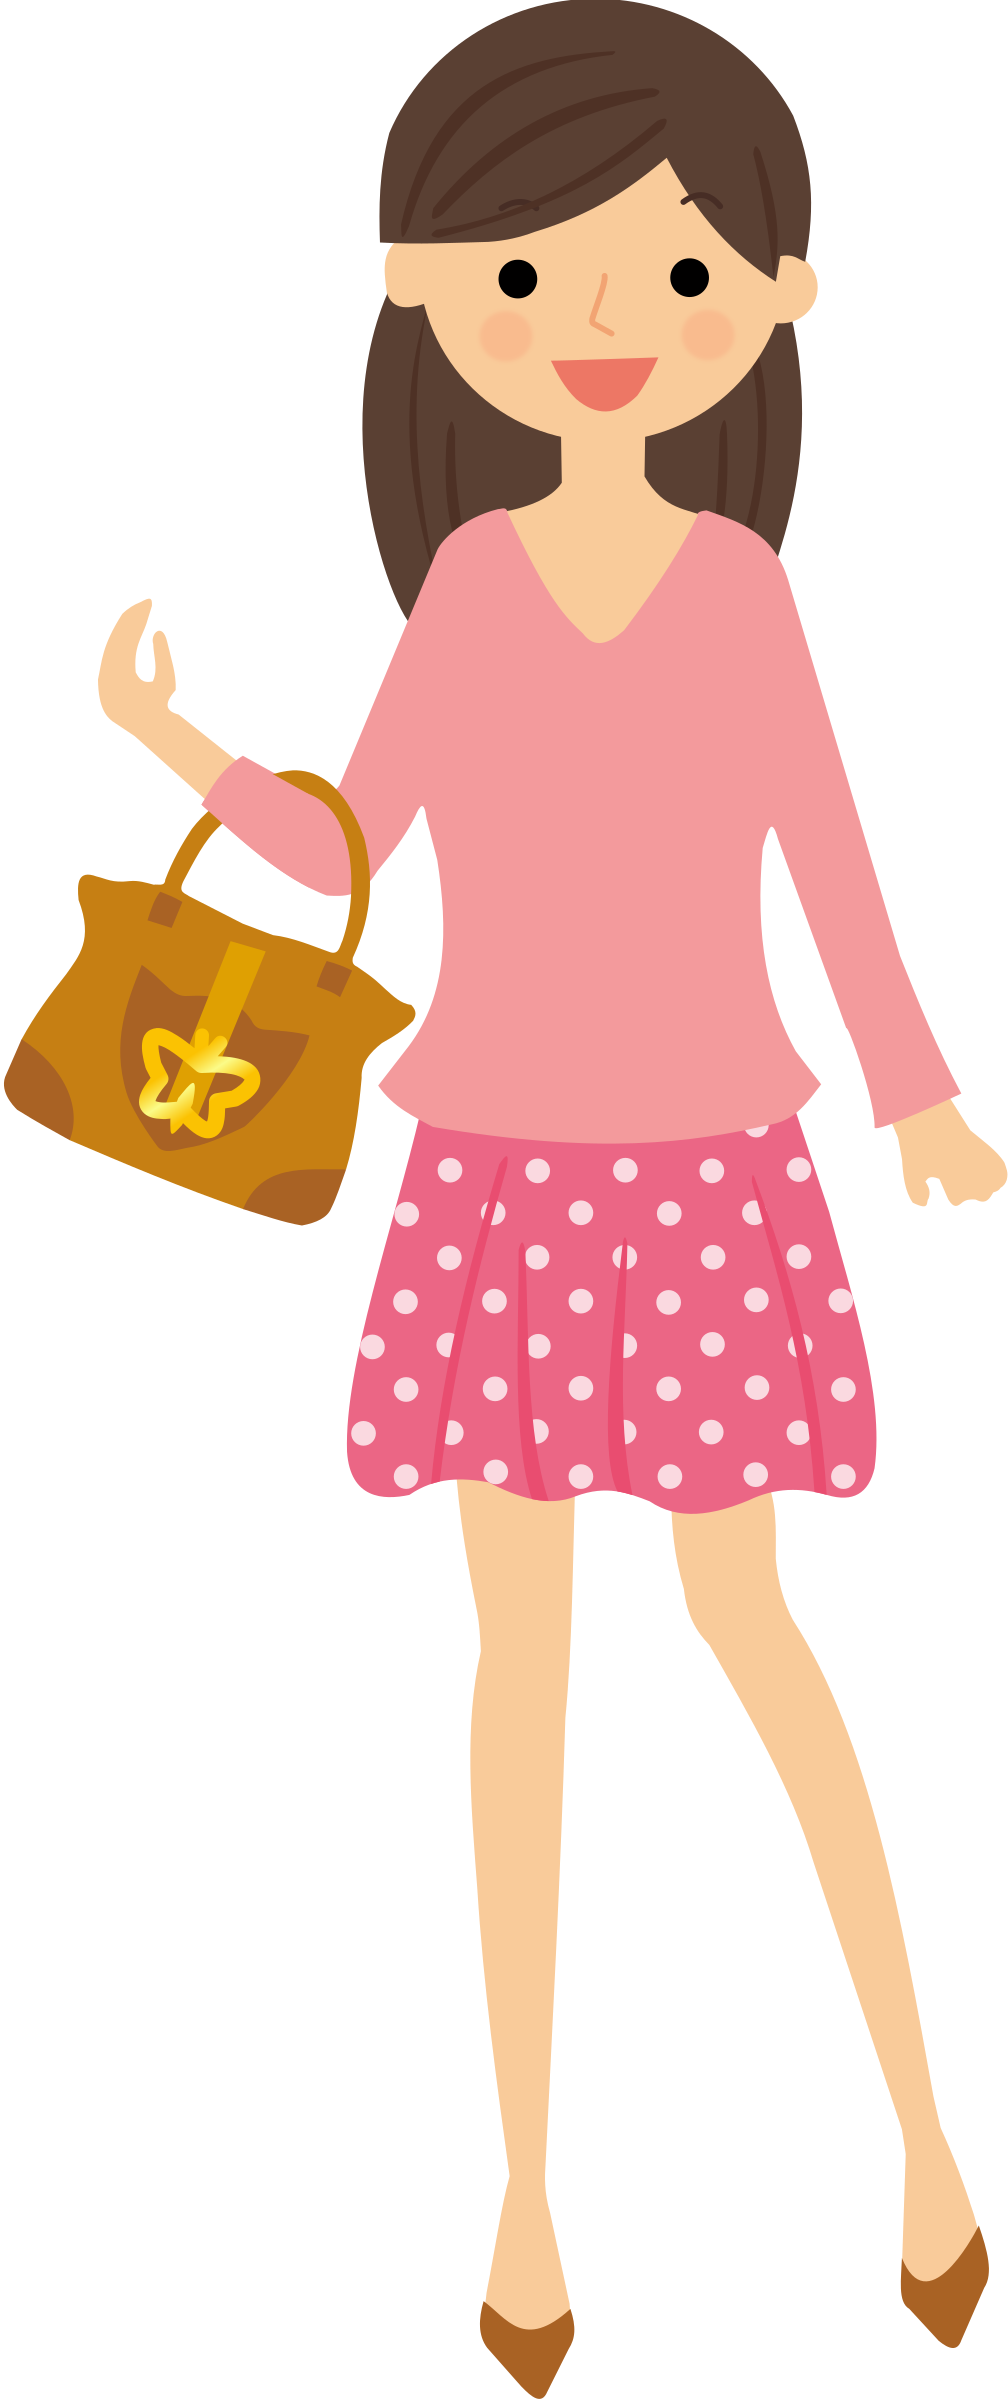 Big image png. Girl clipart shopping